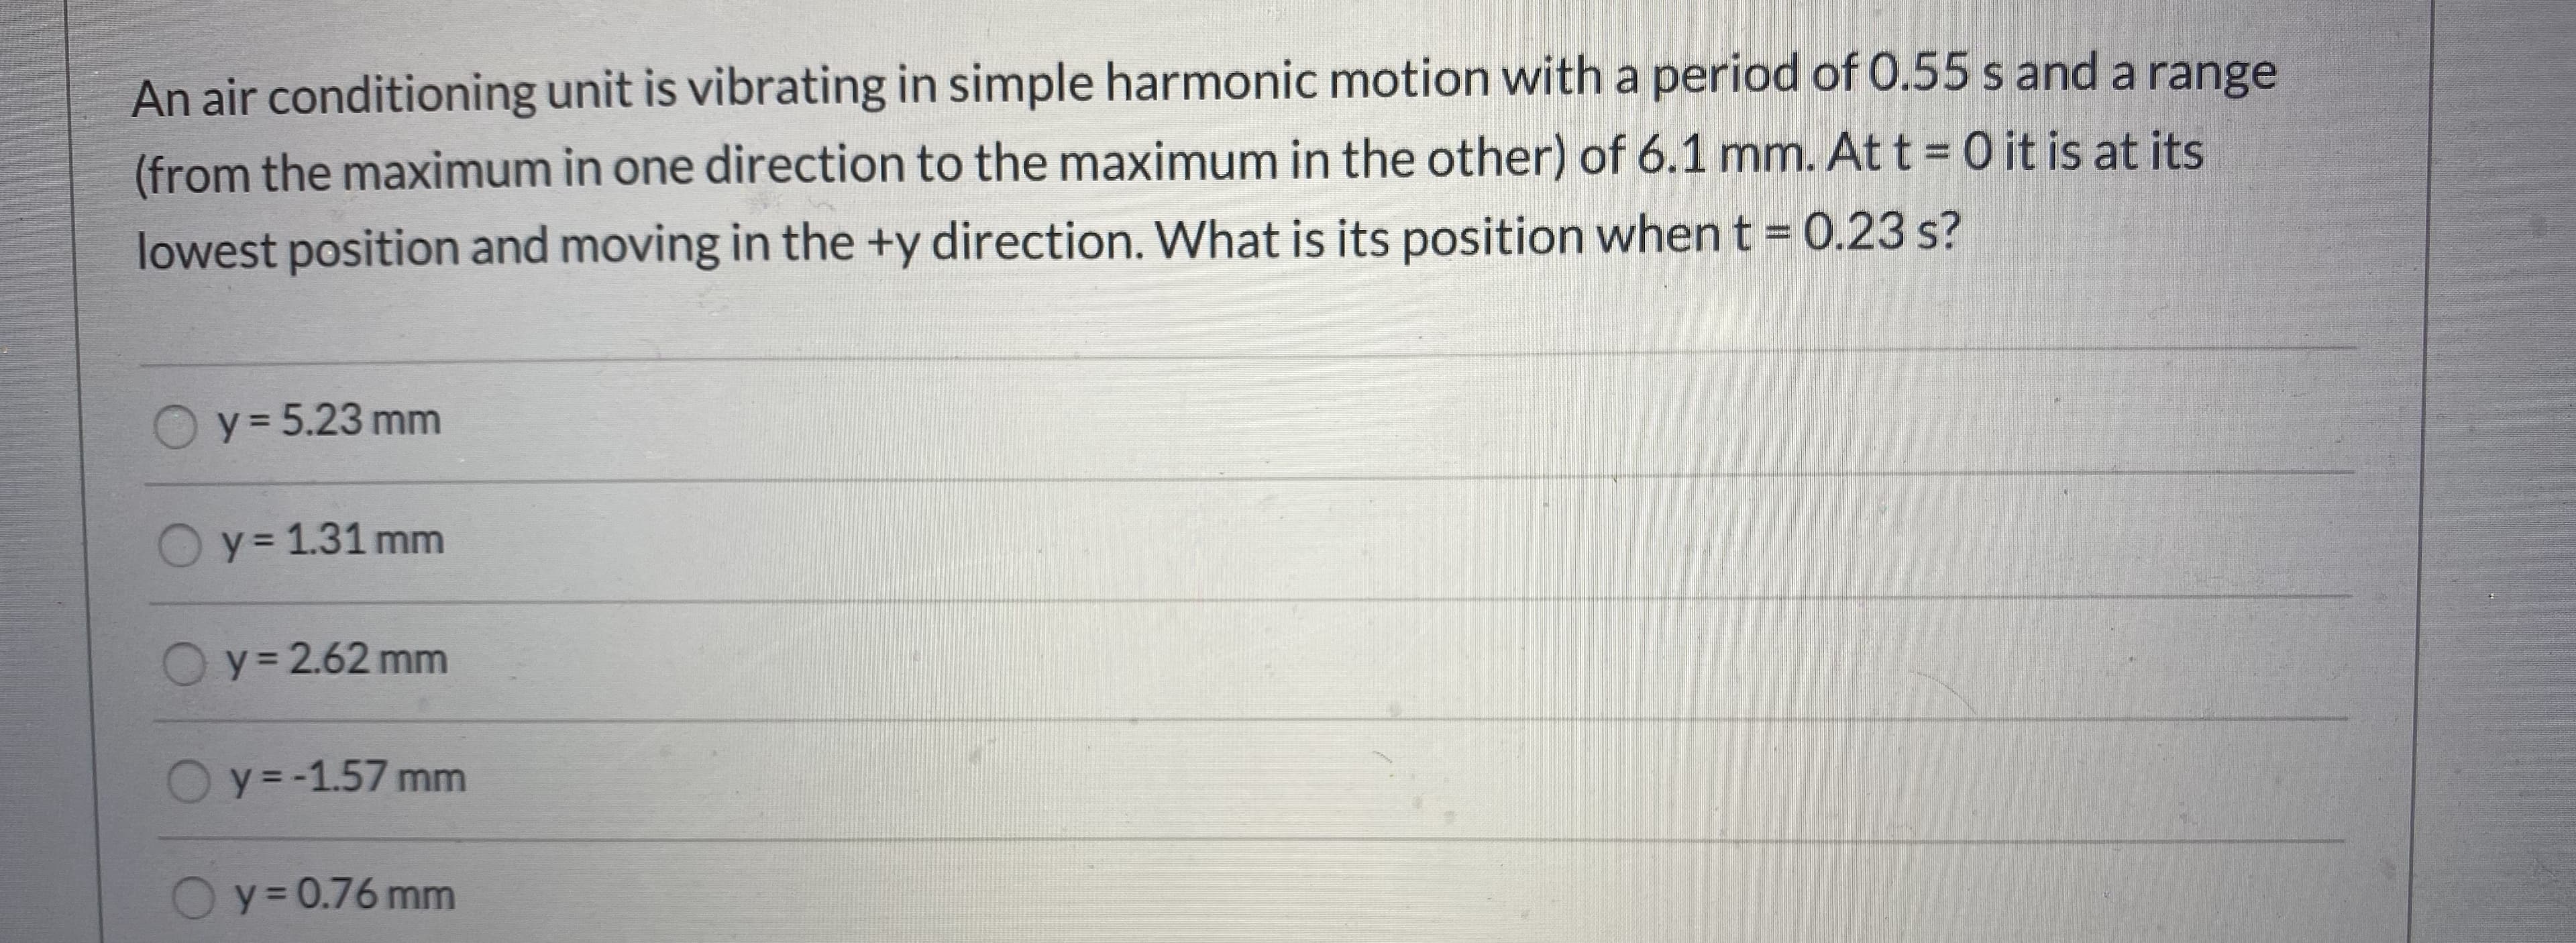 An air conditioning unit is vibrating in simple harmonic motion with a period of 0.55 s and a range
(from the maximum in one direction to the maximum in the other) of 6.1 mm. Att= 0 it is at its
lowest position and moving in the +y direction. What is its position when t = 0.23 s?
